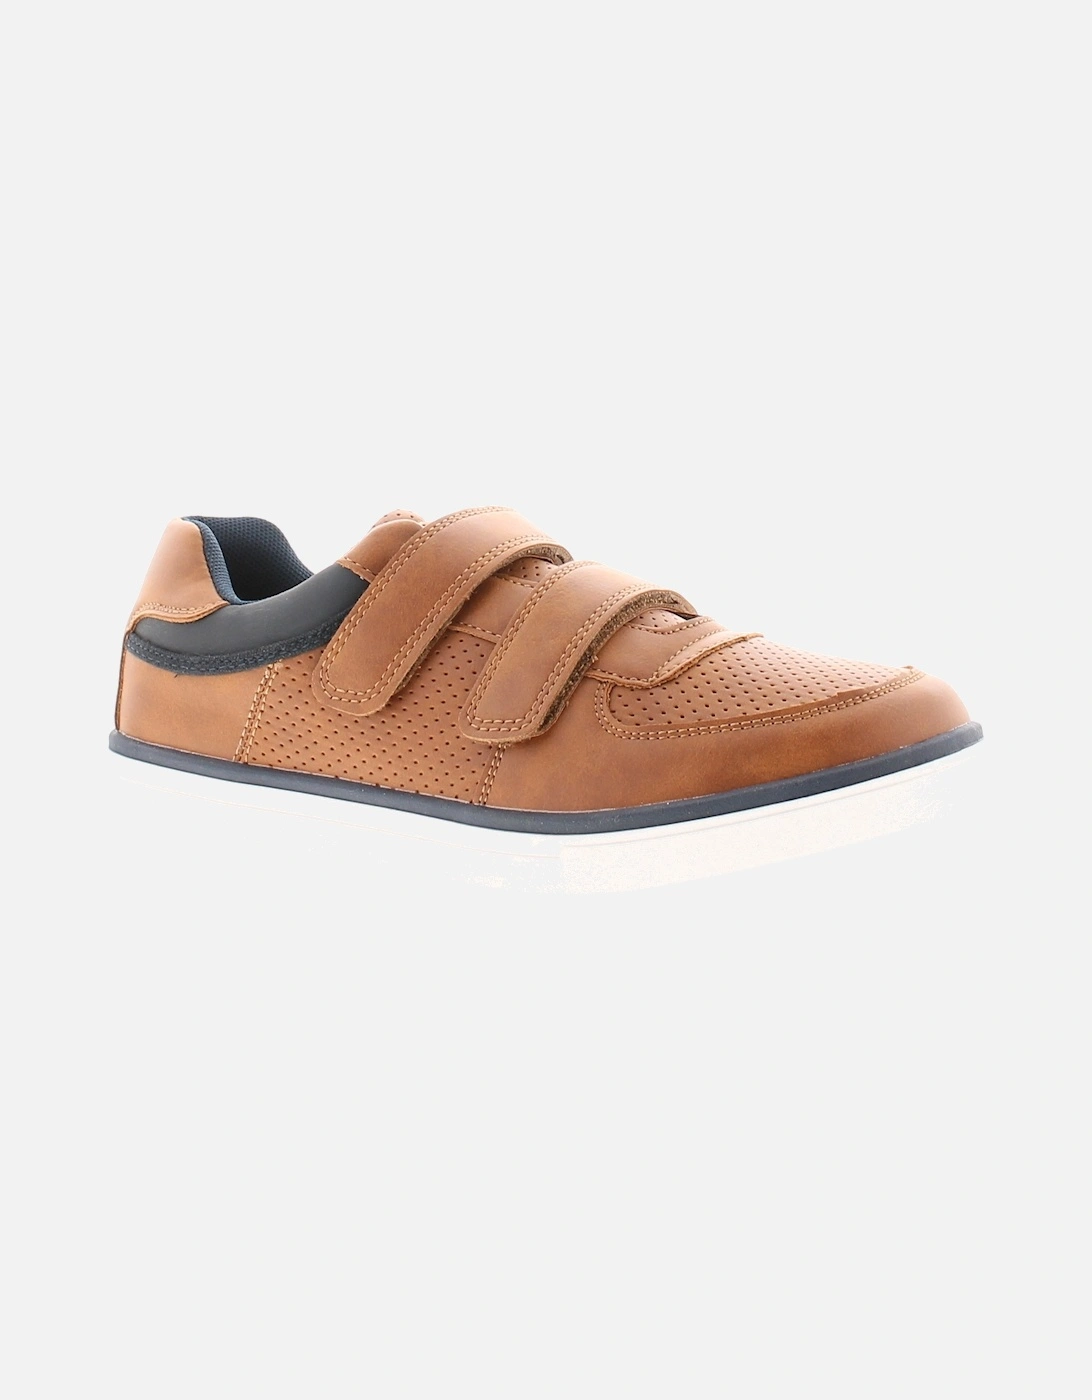 Older Boys Shoes Casual Pepper tan UK Size, 6 of 5